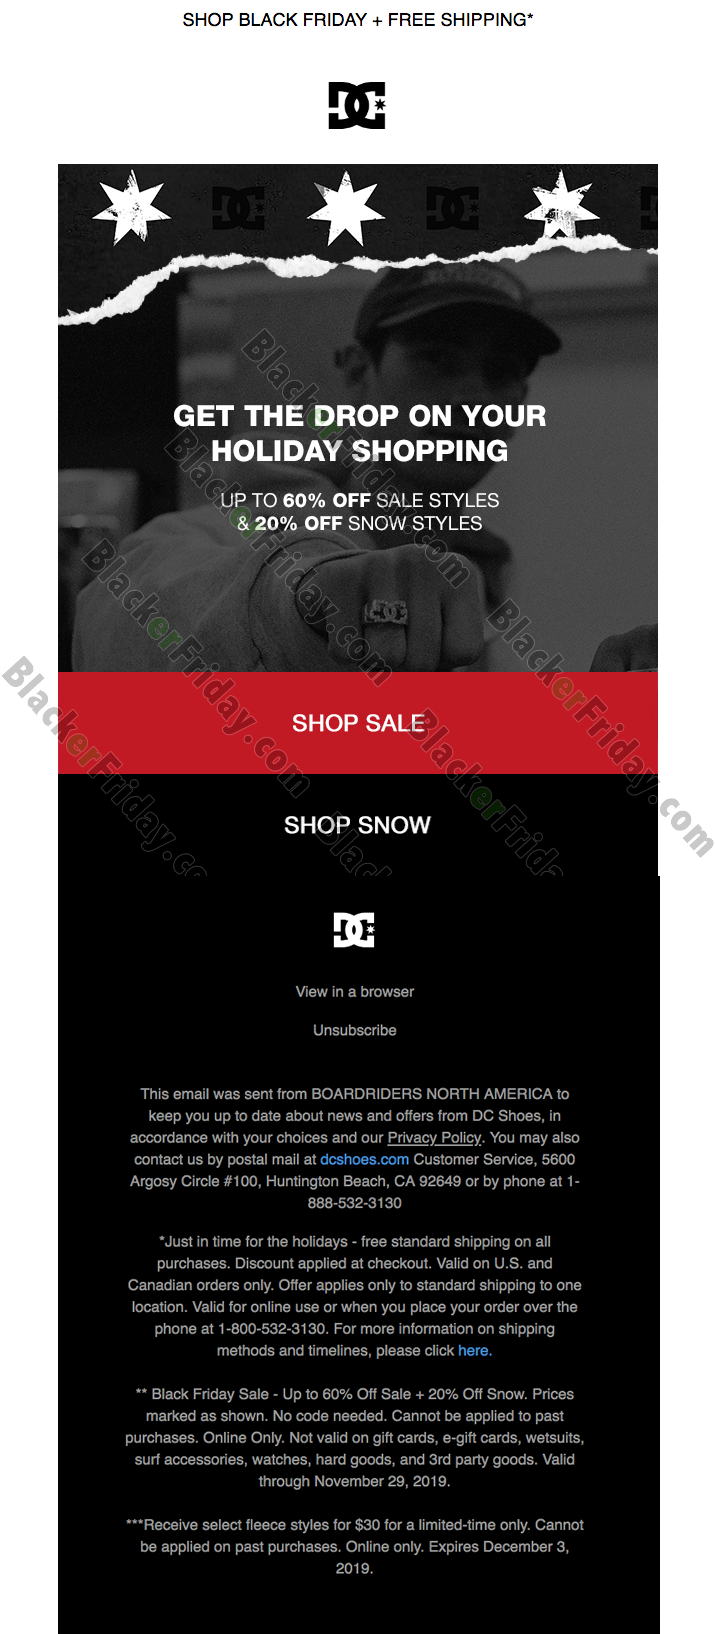 DC Shoes Black Friday 2020 Sale - What 